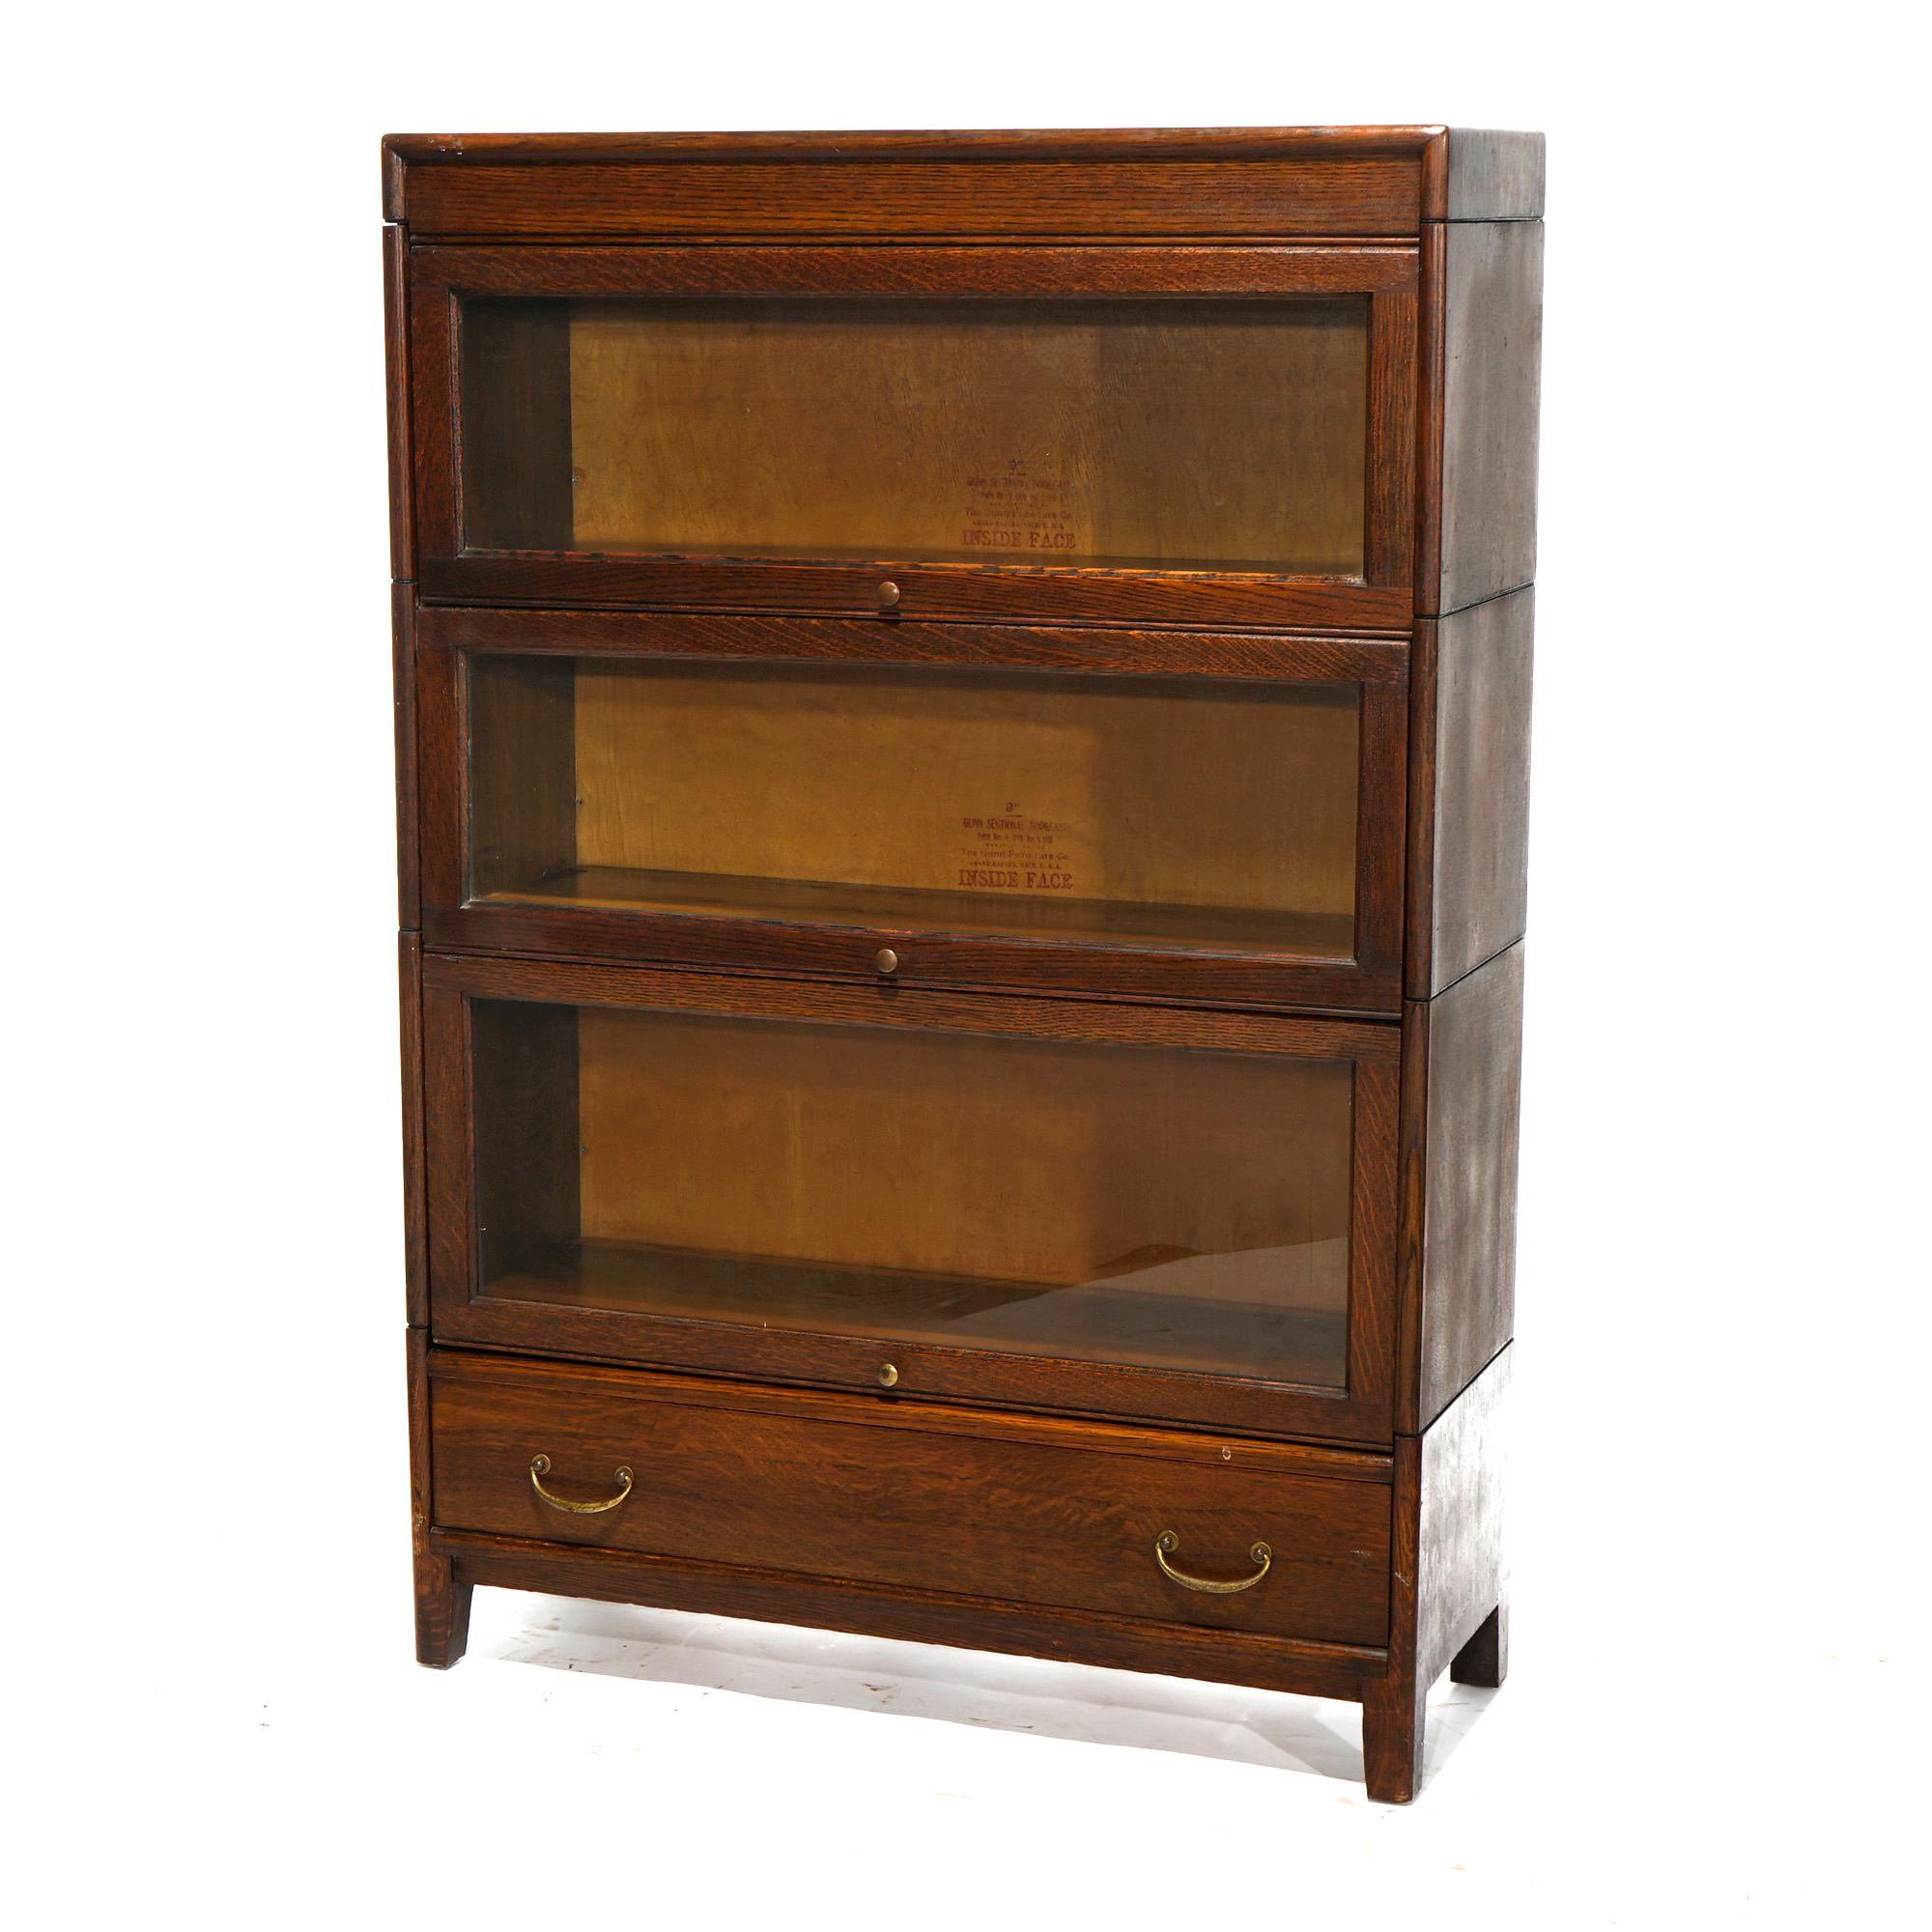 An antique Arts and Crafts Mission barrister bookcase in the manner of Globe Wernicke offers quarter sawn oak construction with three stacks, each having pull out glass shelves and a lower with a single long drawer, raised on square and straight